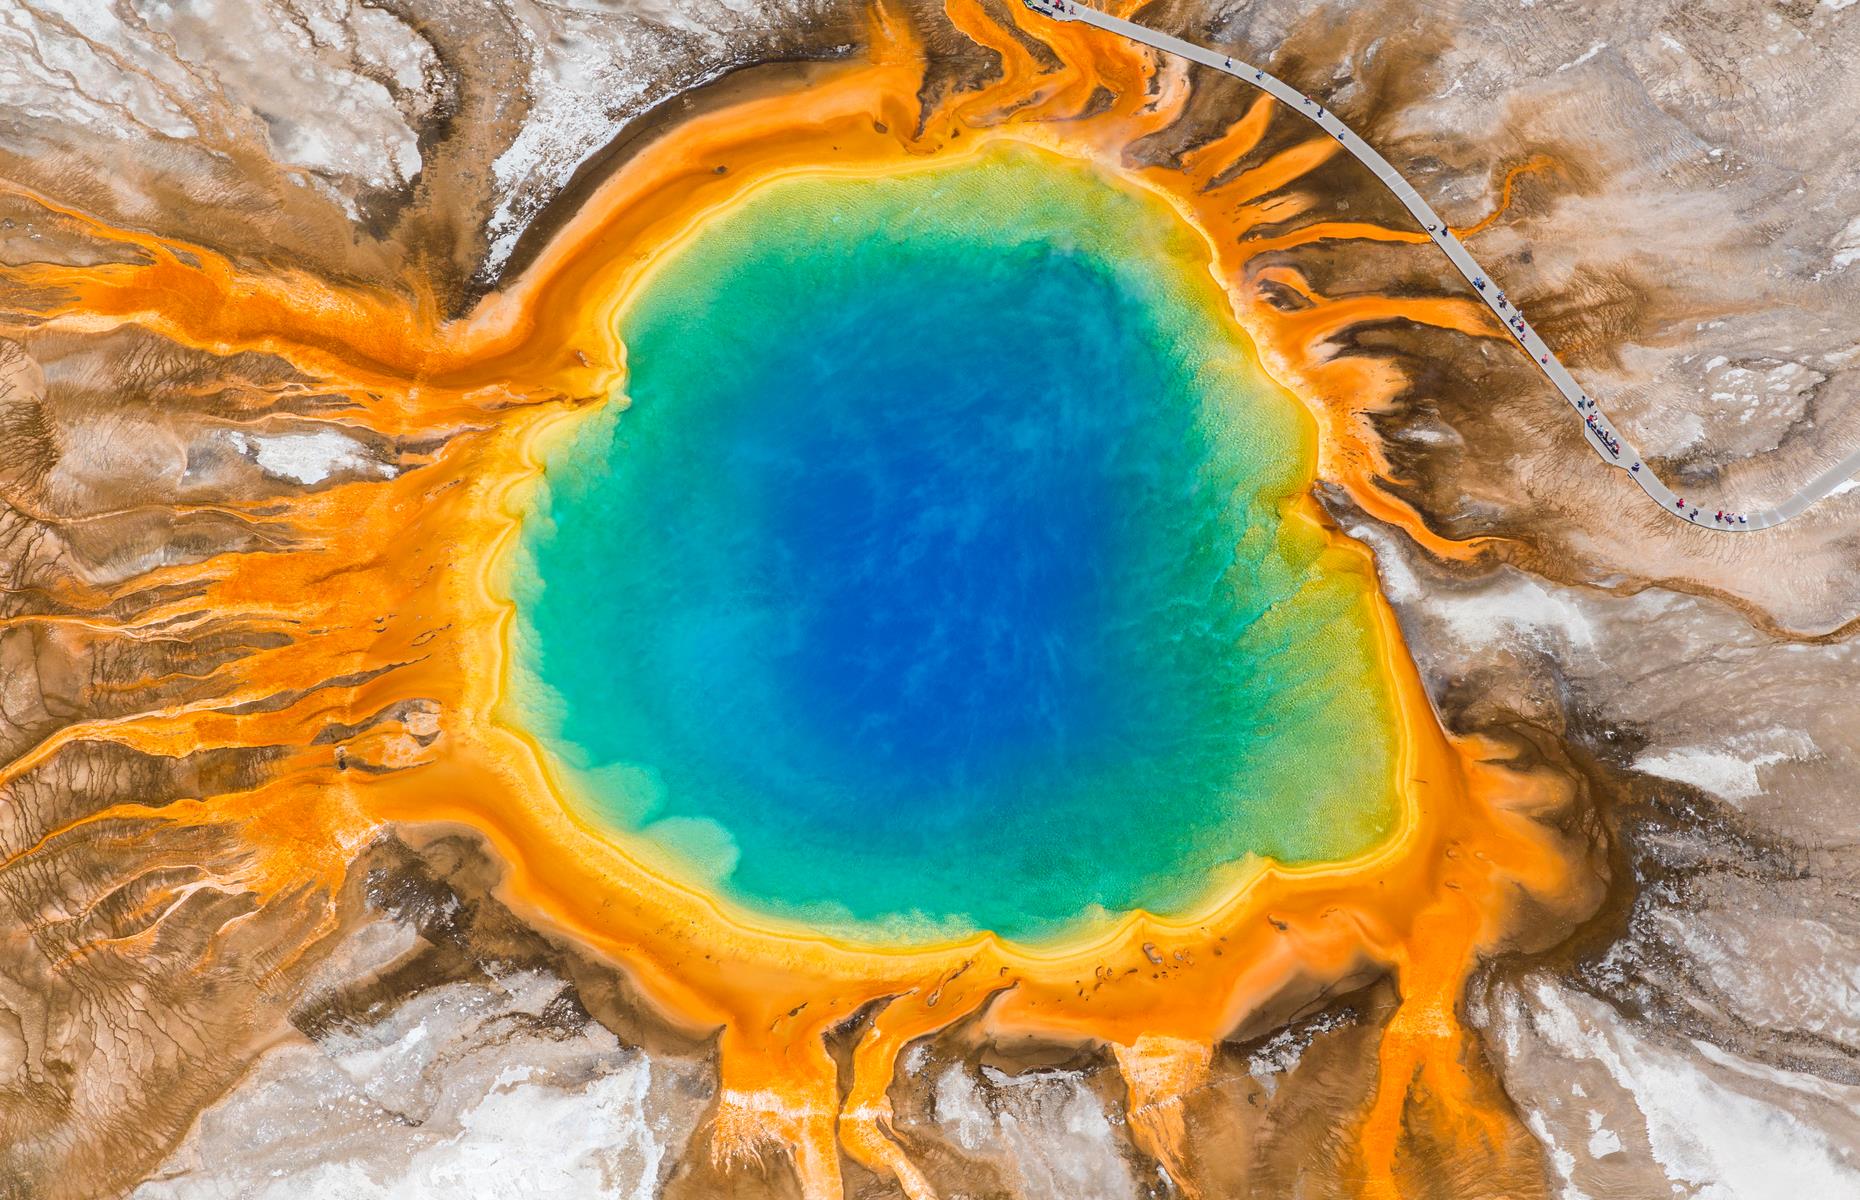 Slide 9 of 45: Yellowstone's eye-popping Grand Prismatic Spring can truly be appreciated from up high. The wonder appears in rings of fiery orange, yellow, turquoise and teal – colors caused by the bacteria that exists in the water. It's a whopping 370 feet (113m) in diameter too, making it one of the largest springs in the world. The Grand Prismatic Spring is in the park's Midway Geyser Basin. 